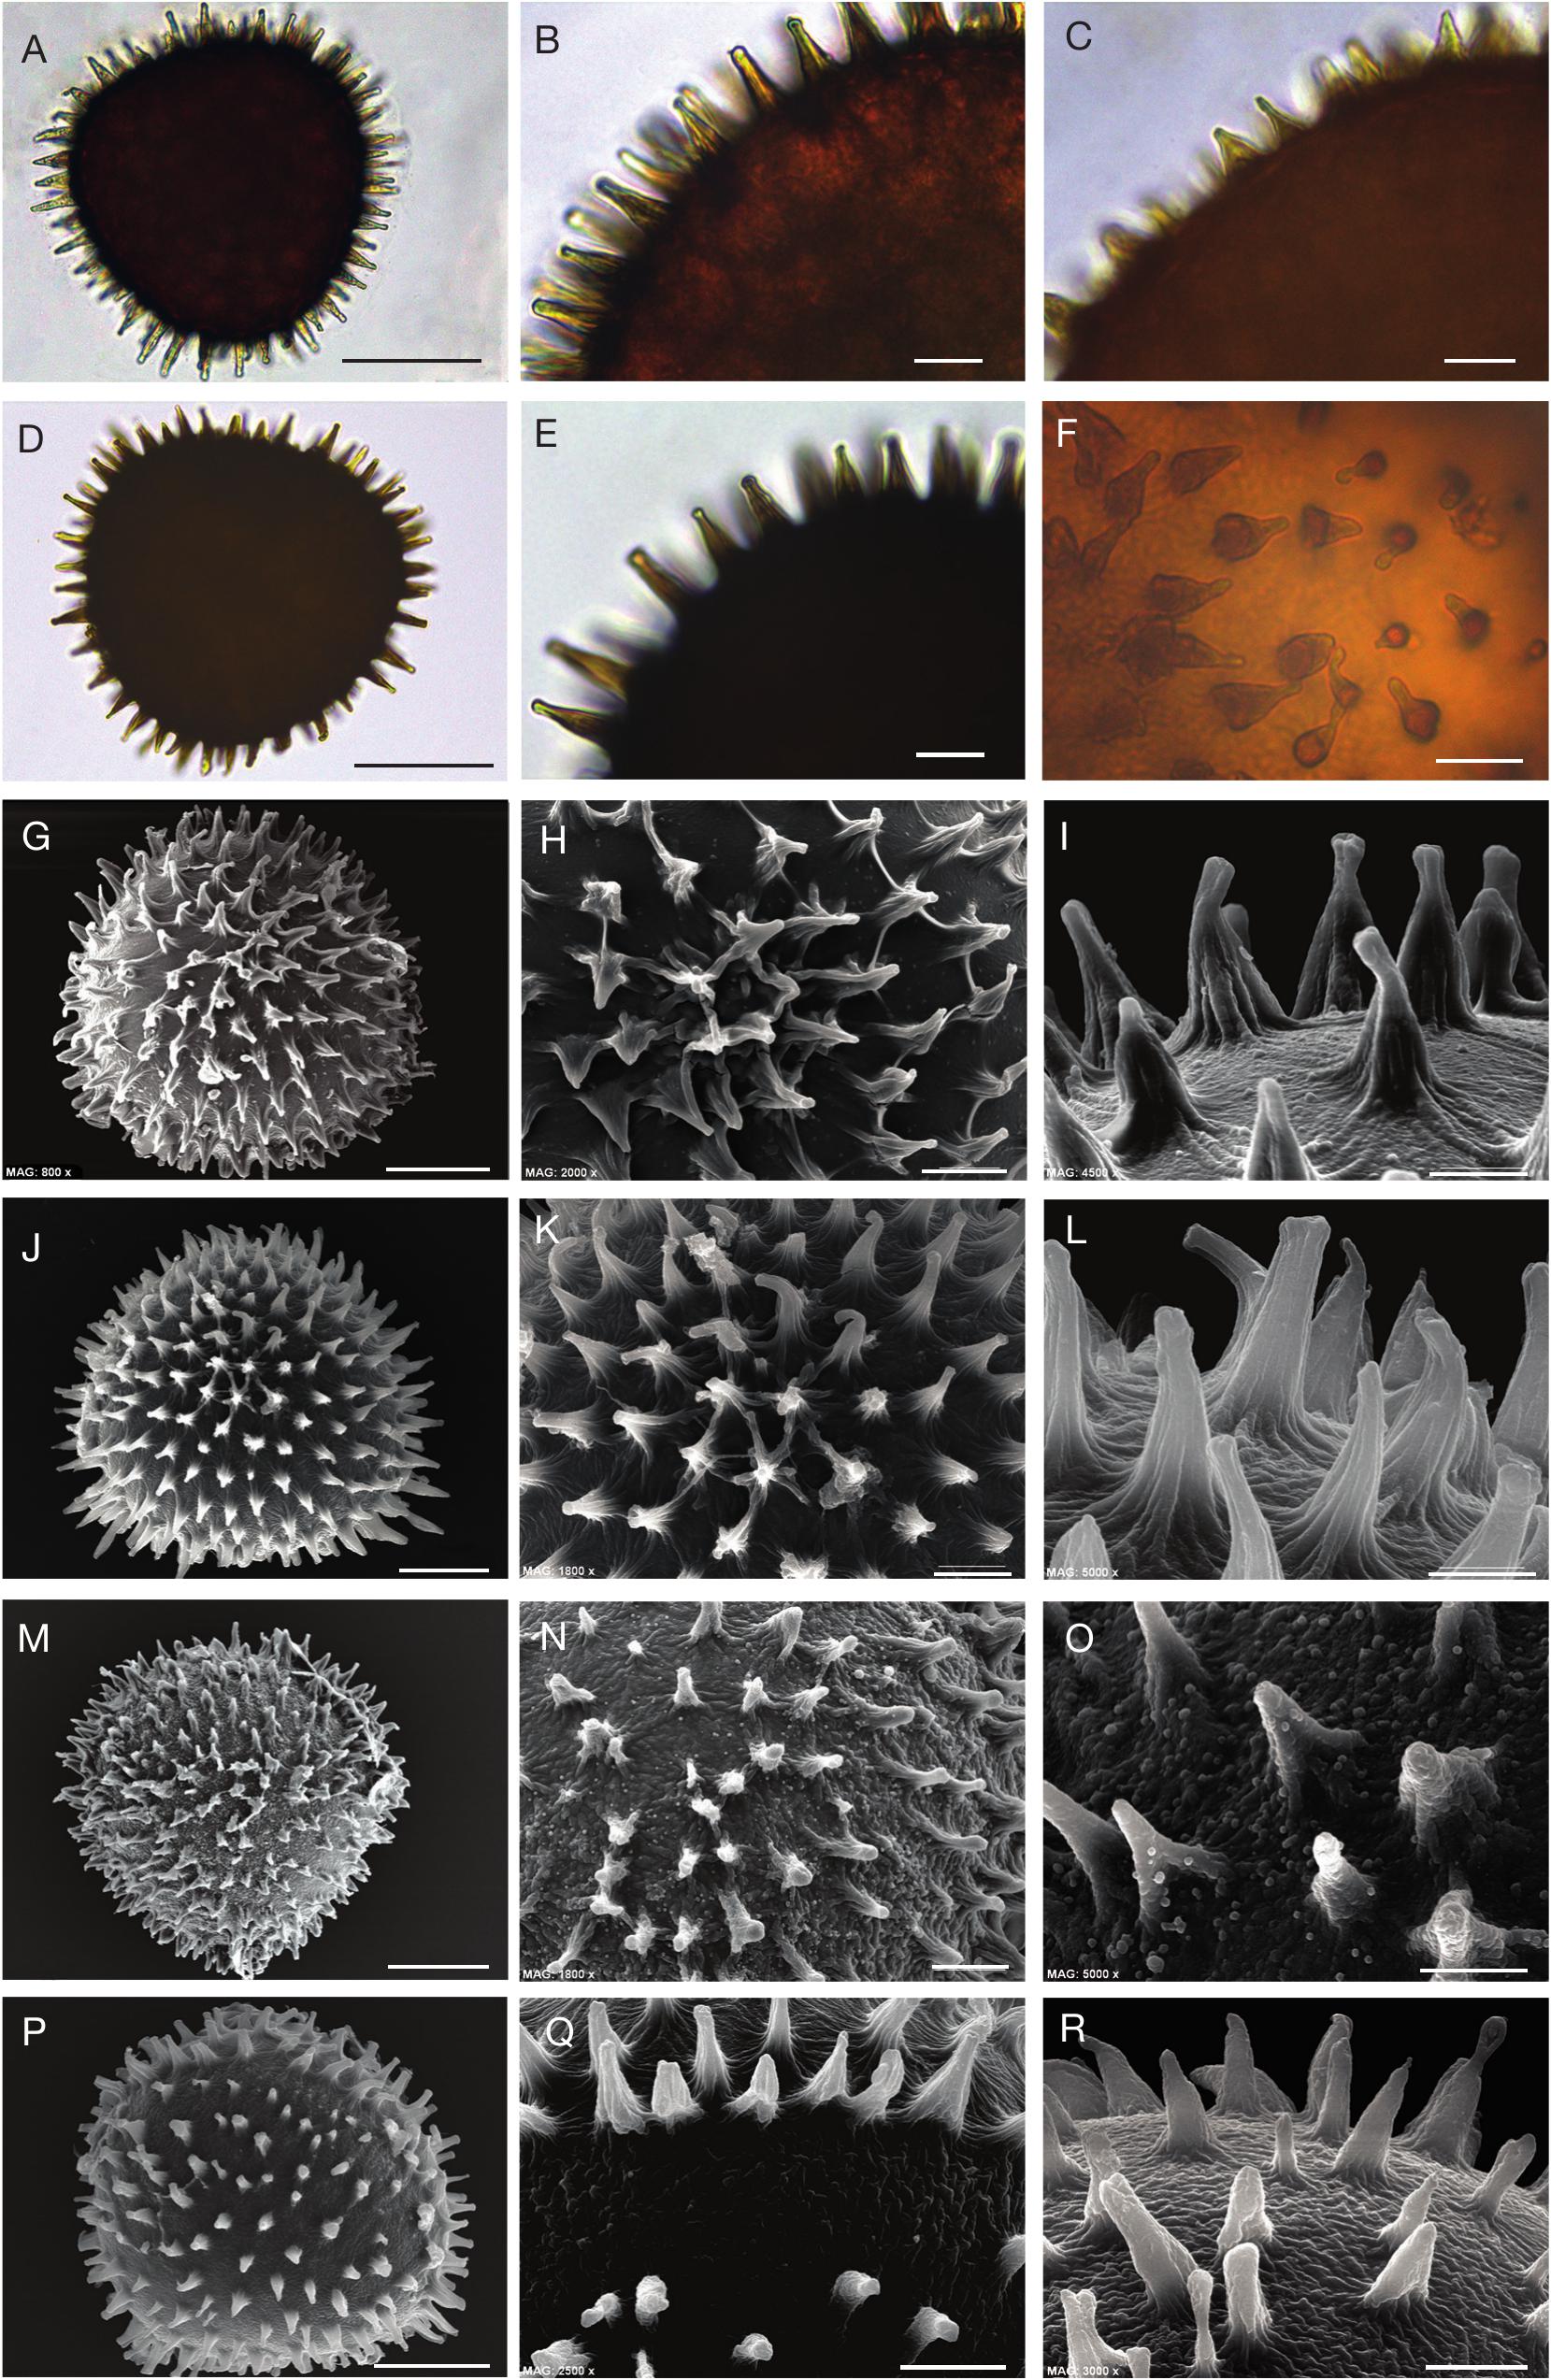 Study Of A New Population Of The Argentinian Endemic Species Riella Choconensis Hassel Riellaceae Marchantiophyta Reveals A Novel Anatomical Structure Of The Female Involucre In Riella